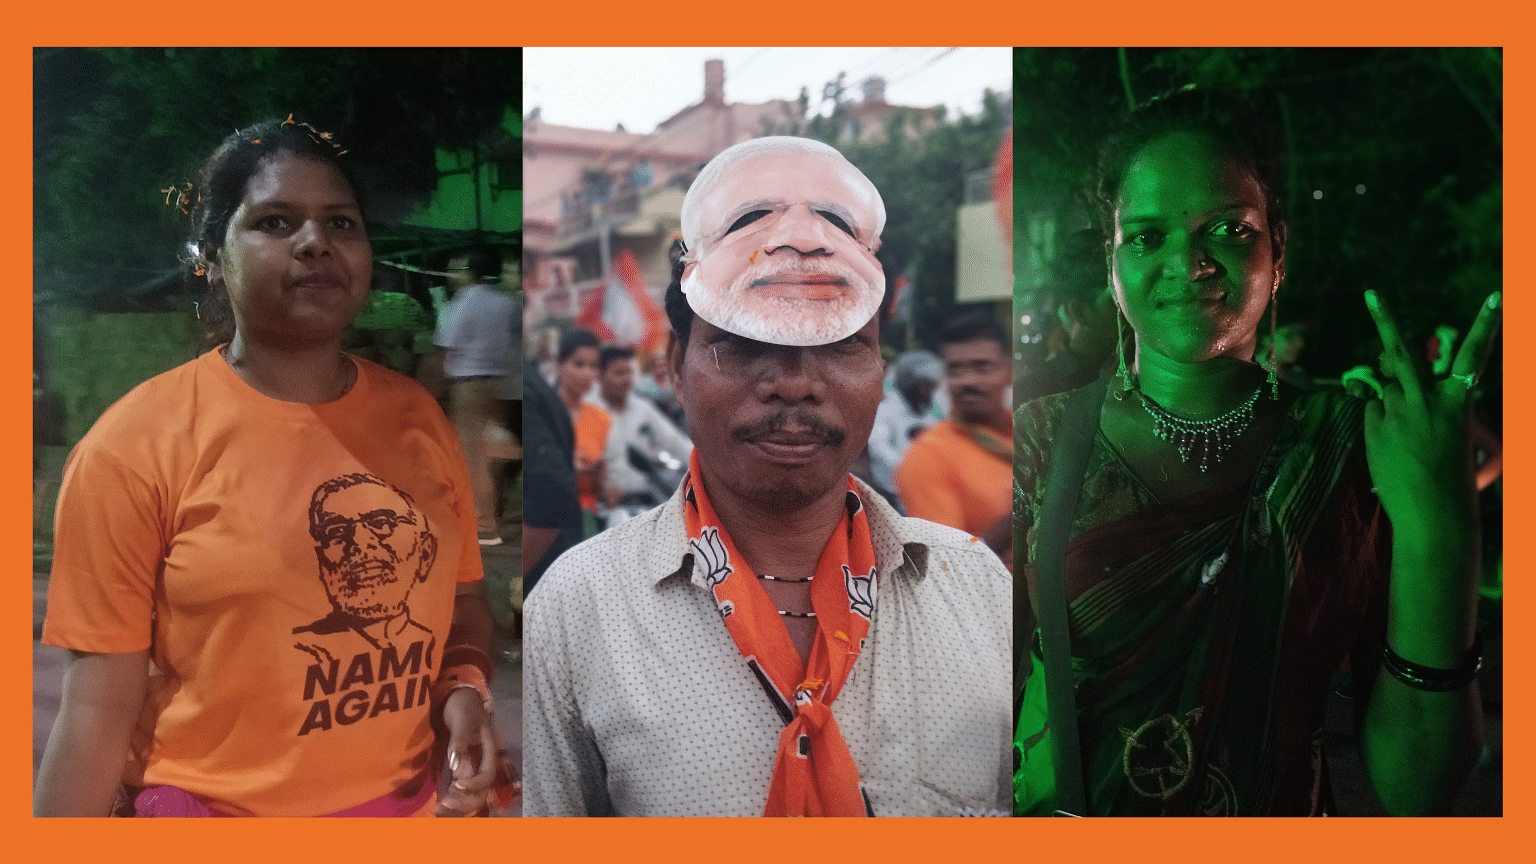 We caught up with people who were part of Narendra Modi’s roadshow in Bhubaneswar, Odisha.